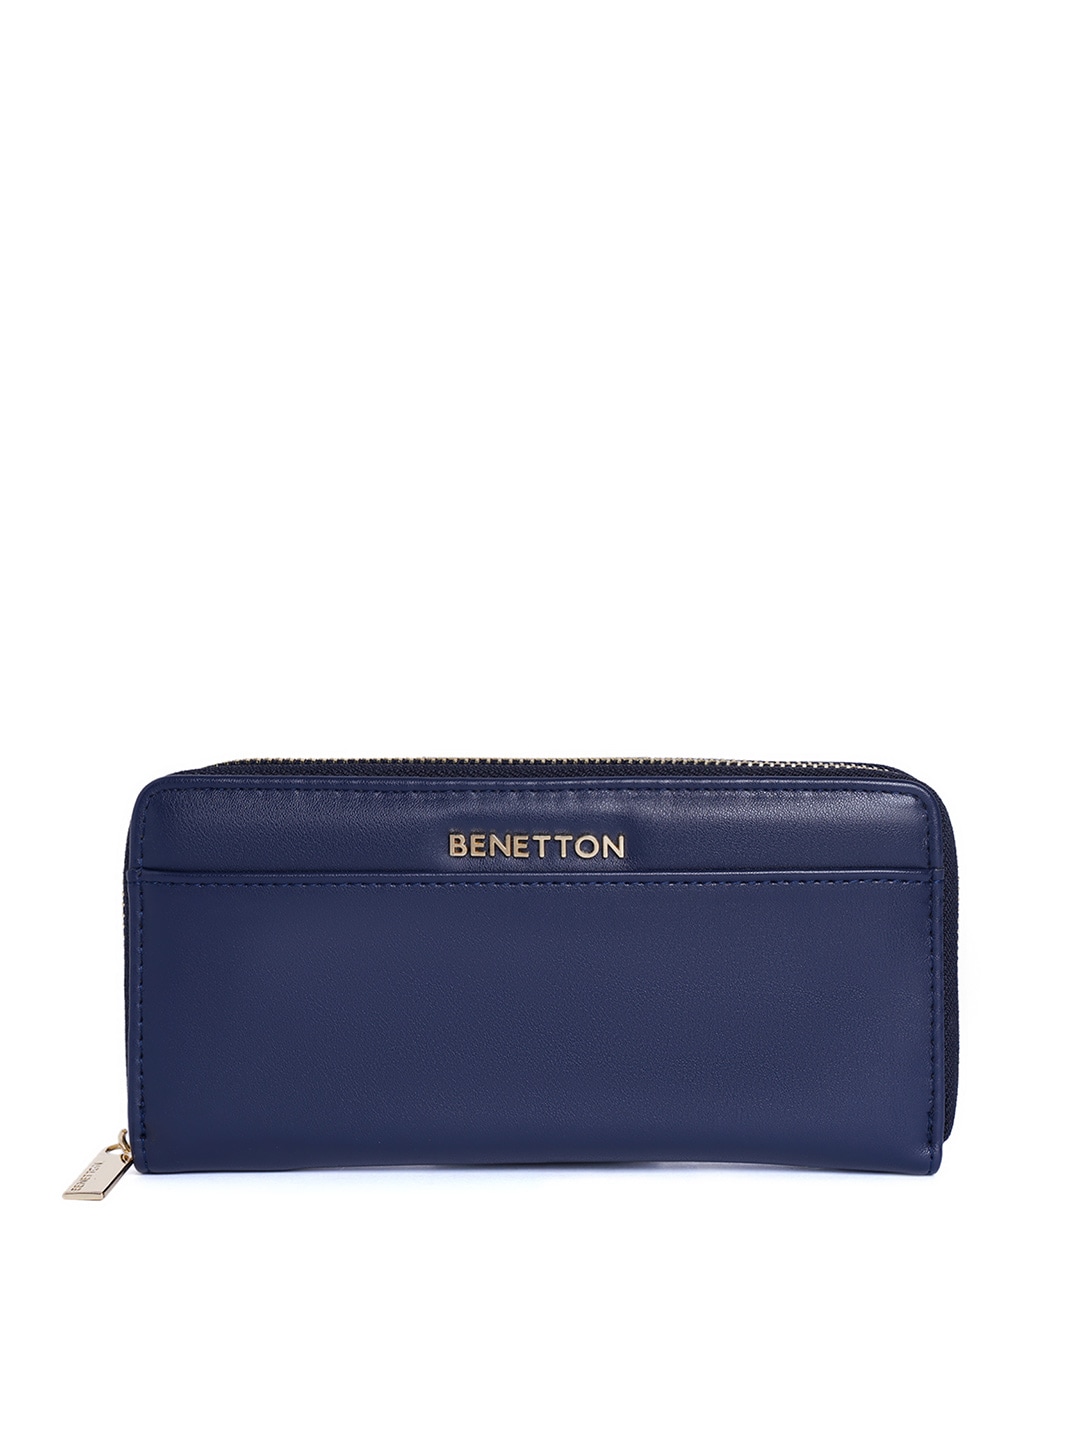 United Colors of Benetton Women Navy Blue Solid Synthetic Leather Zip Around Wallet Price in India